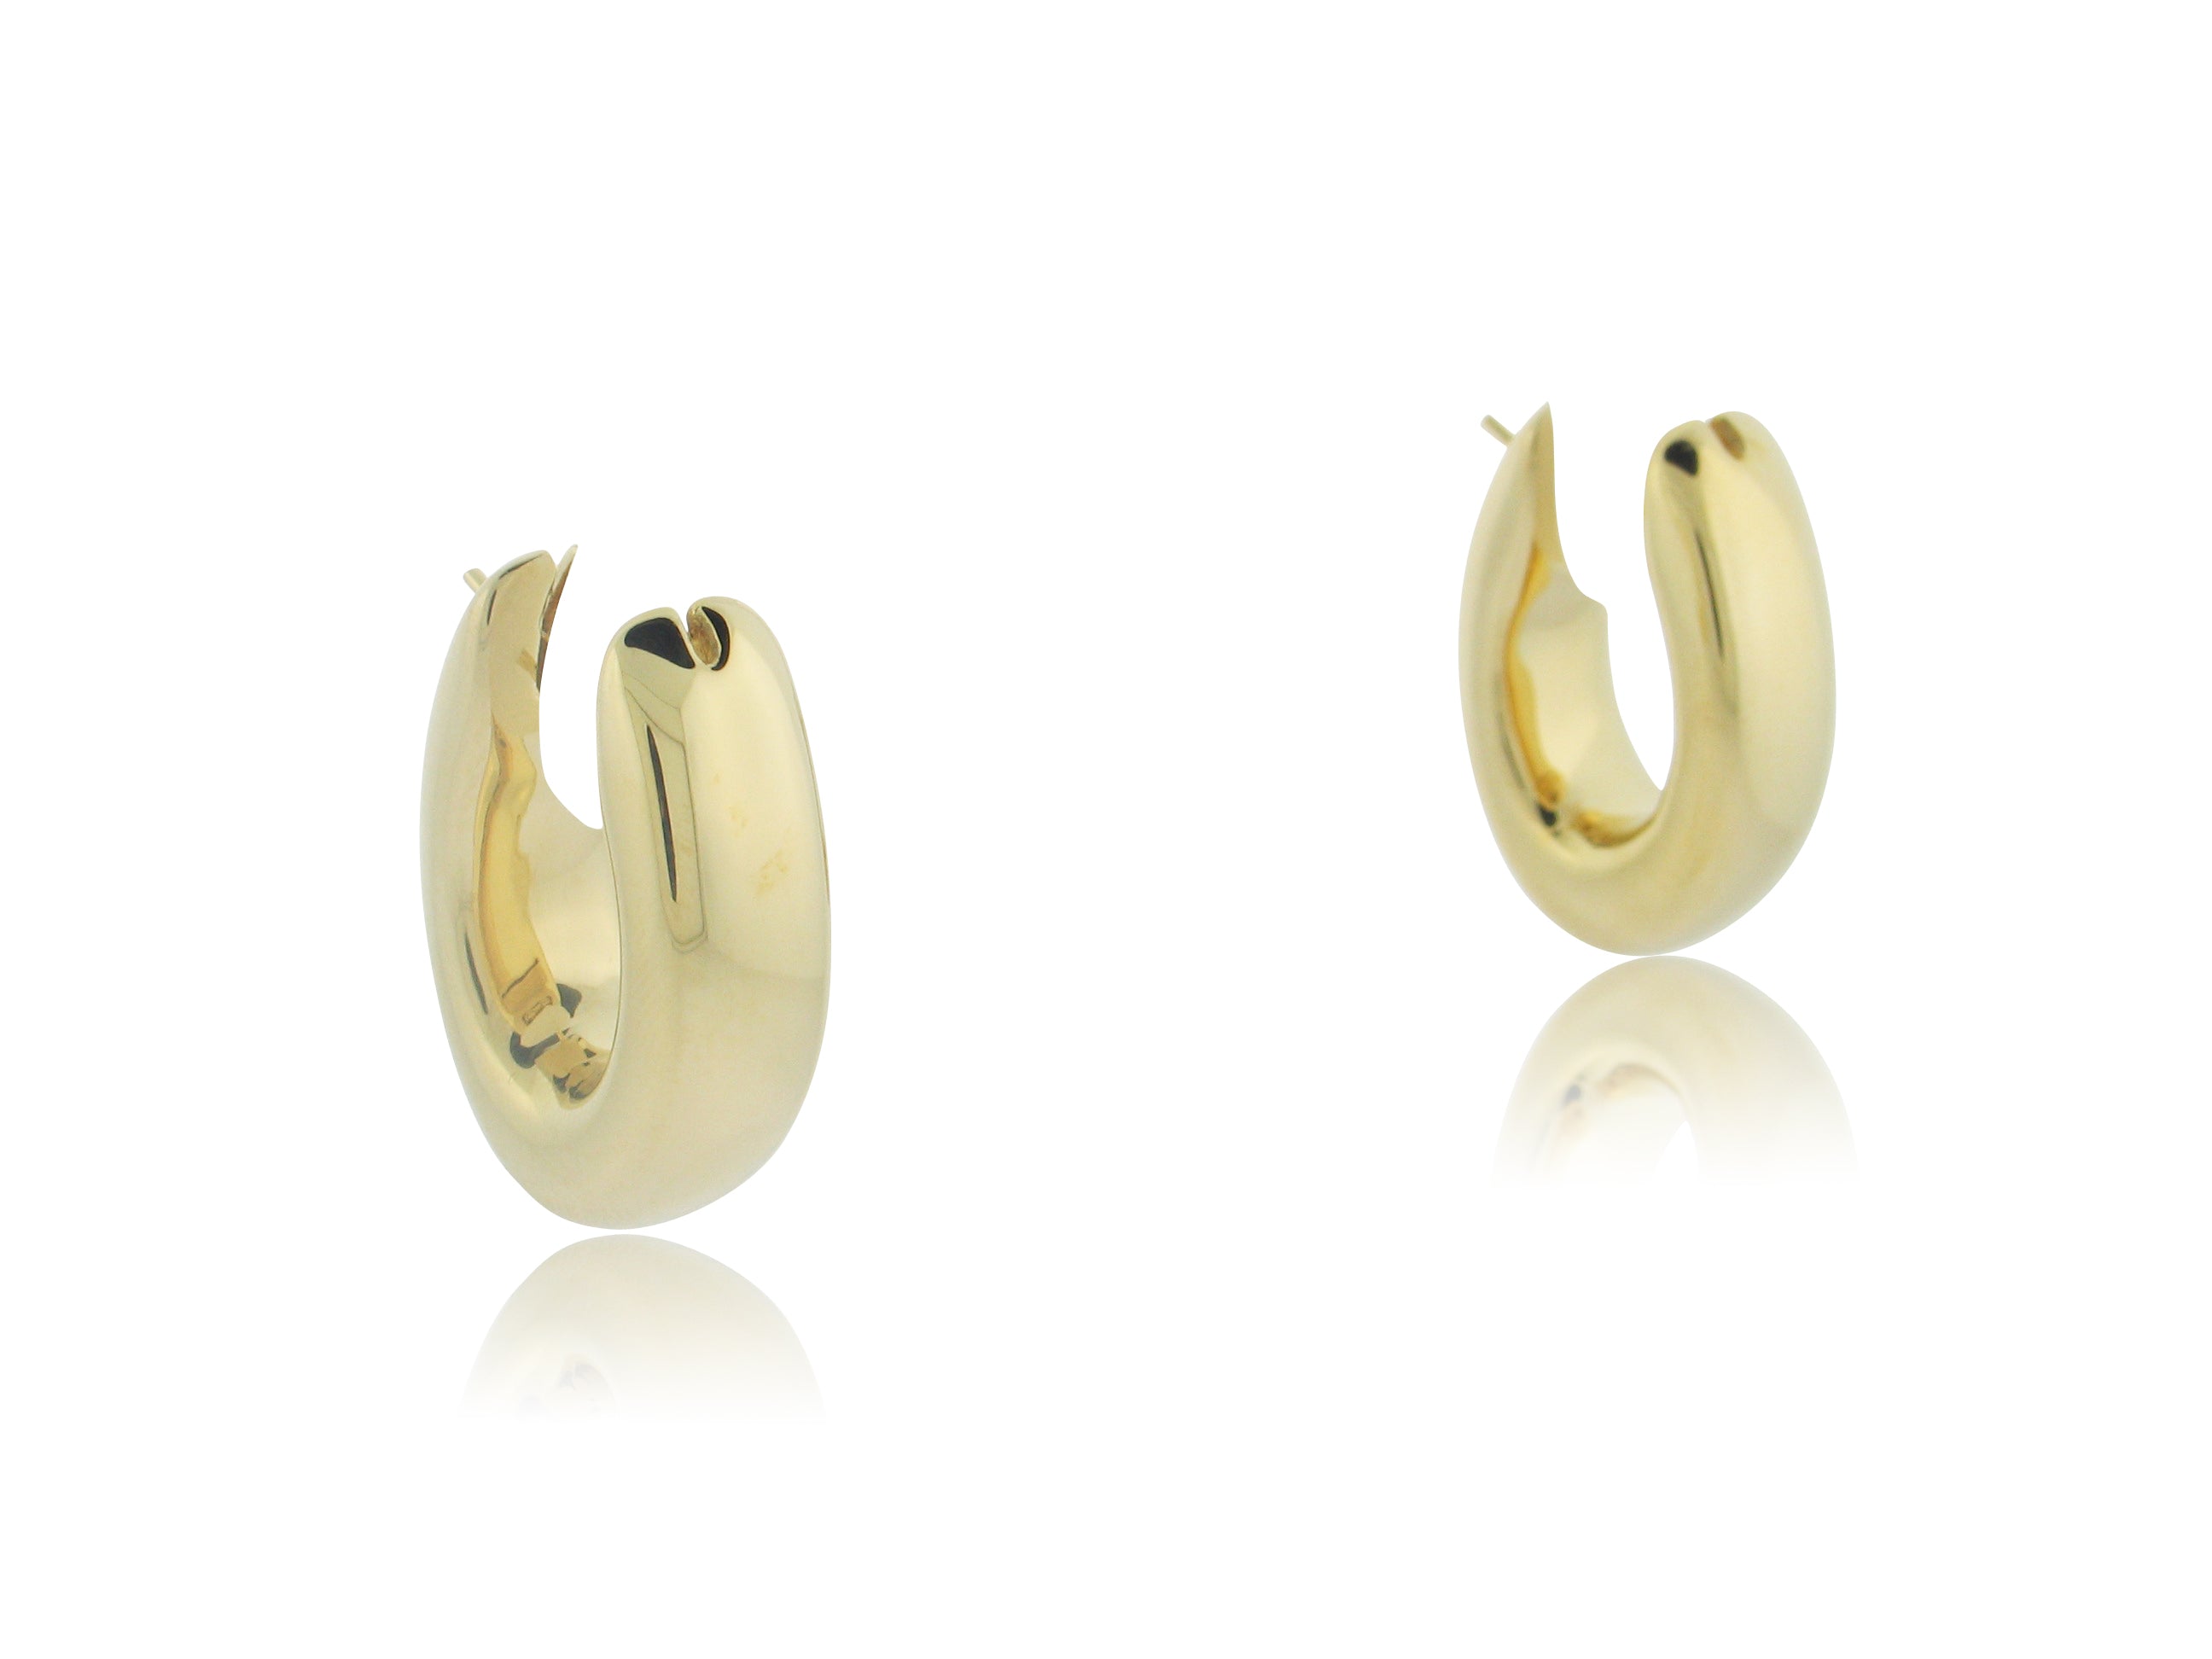 ROBERTO COIN 18K  YELLOW GOLD HIGH POLISHED HOOP EARRINGS FROM THE GOLD COLLECTION